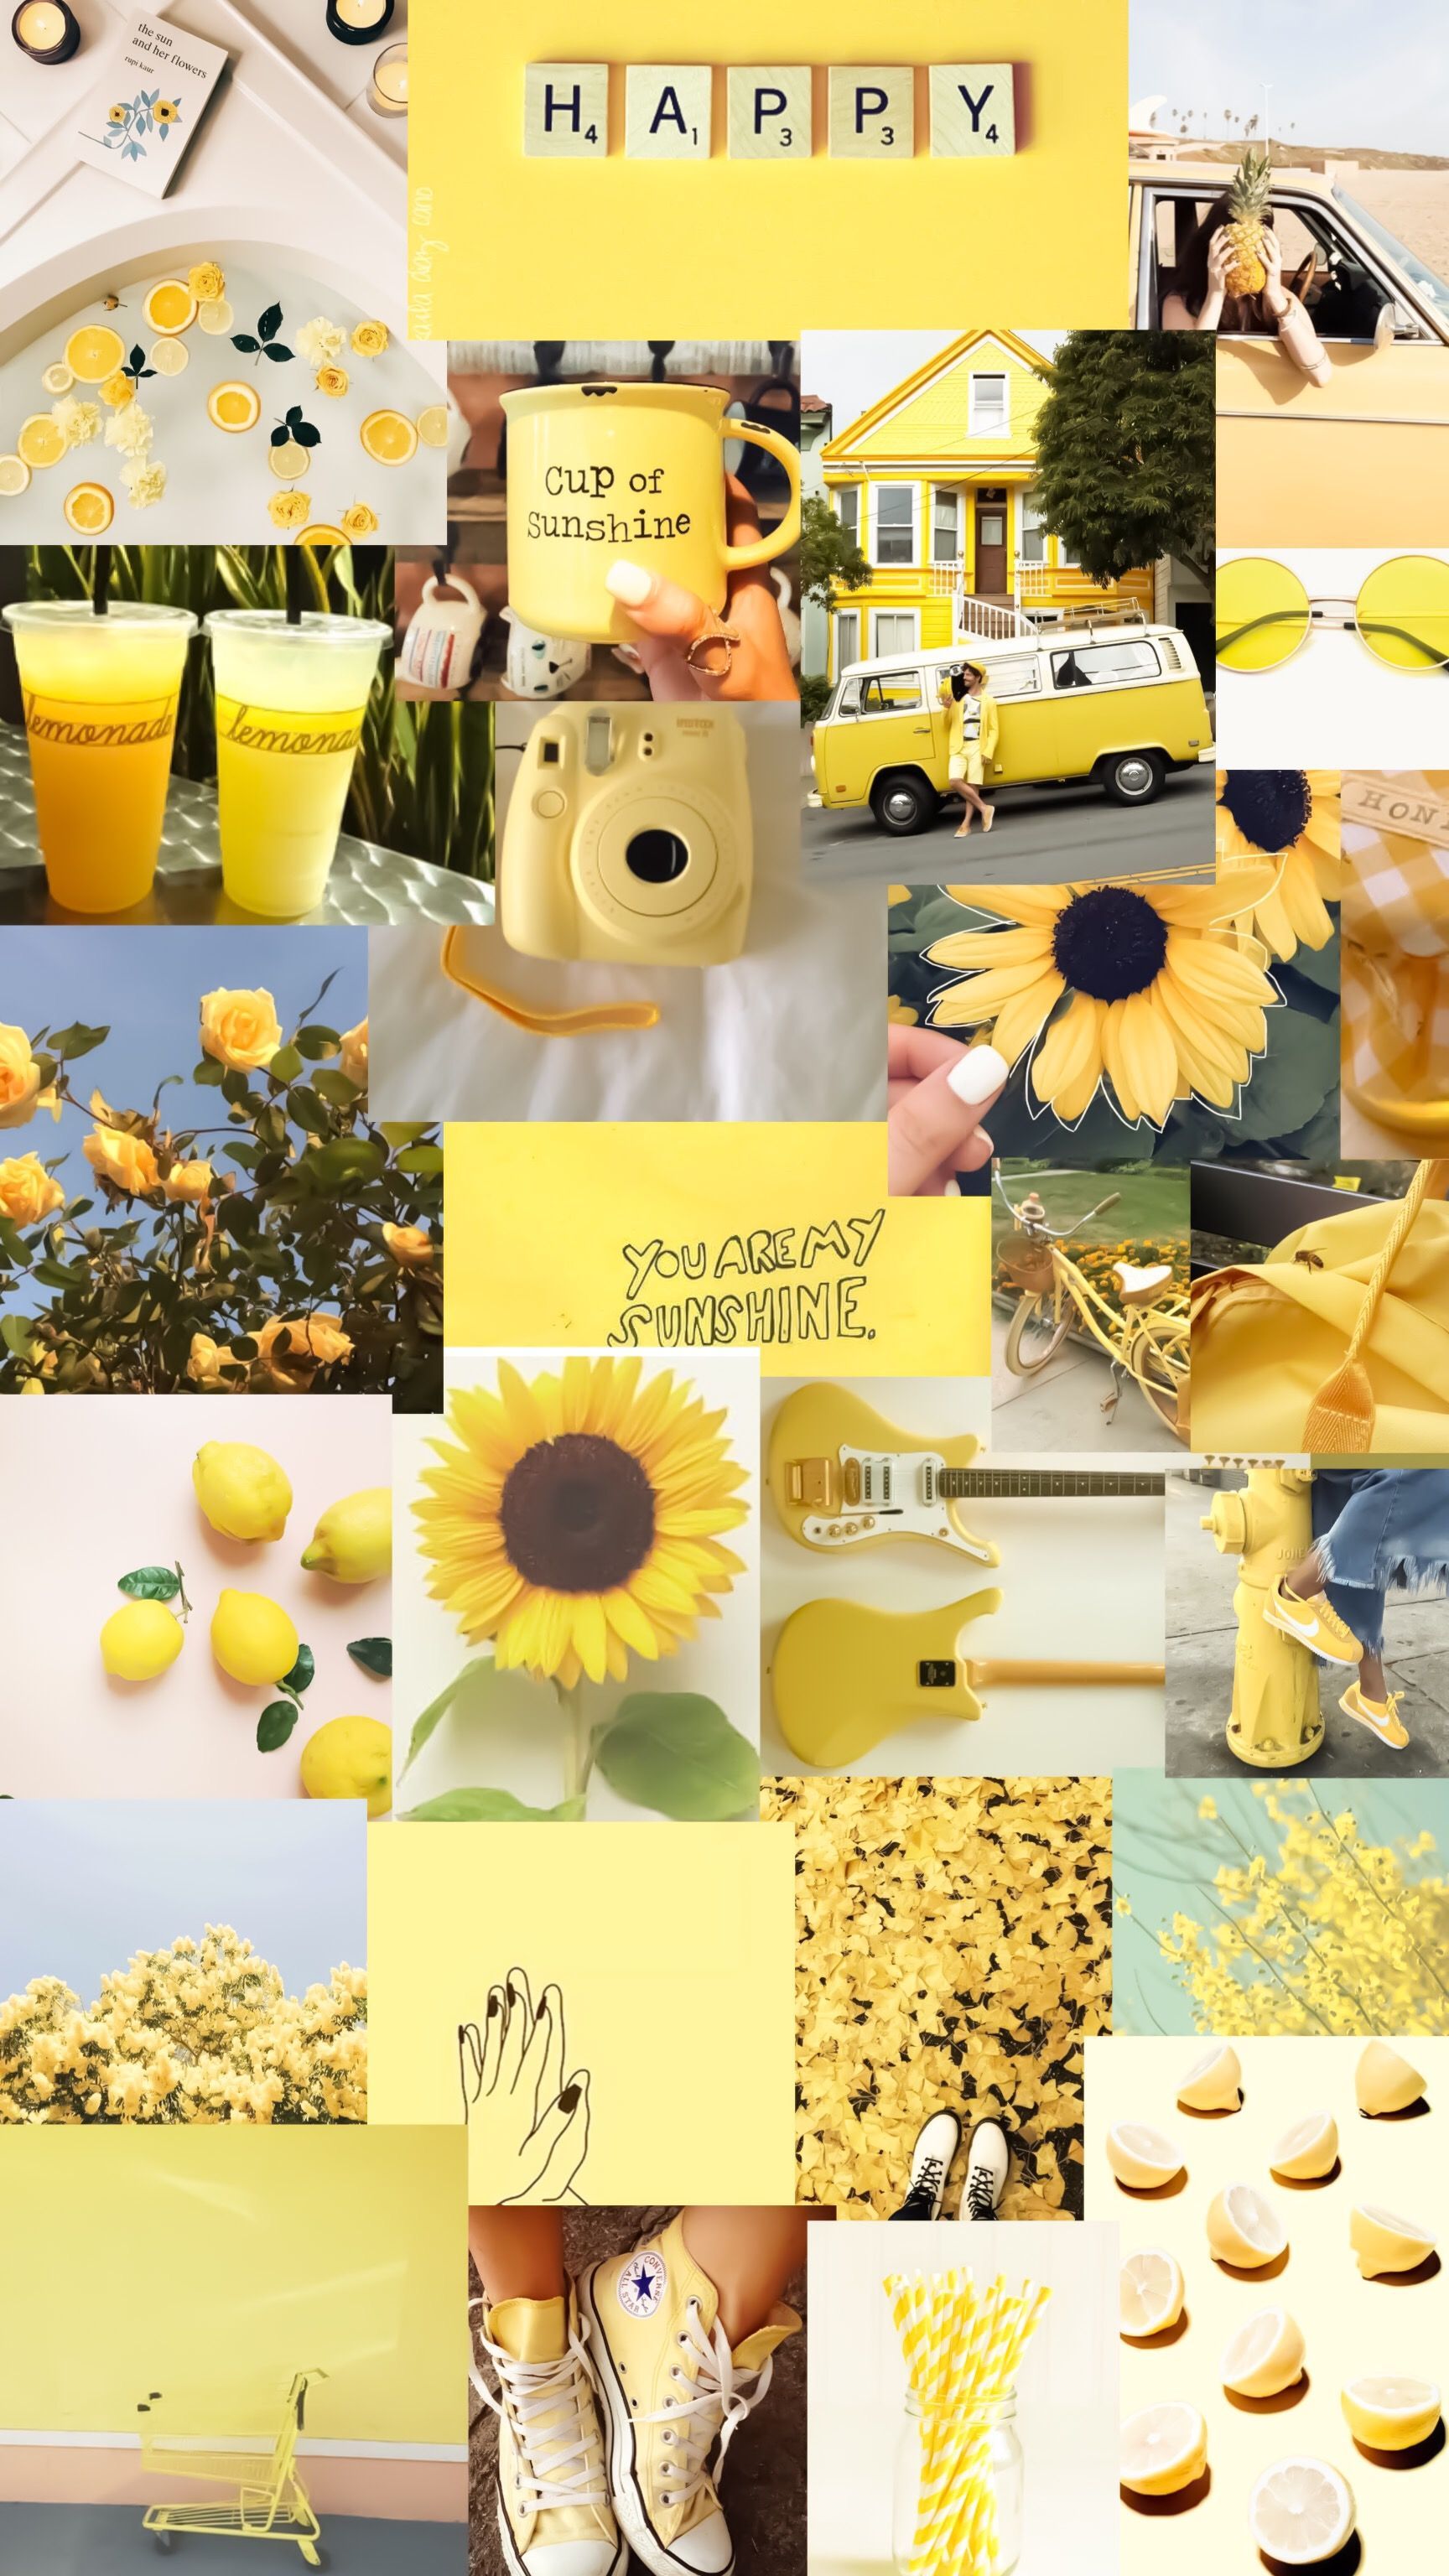 Pin By 씨 김 On Collage Wallpaper. IPhone Wallpaper Tumblr Aesthetic, IPhone Wallpaper Yellow, Aesthetic Iphone Wallpaper